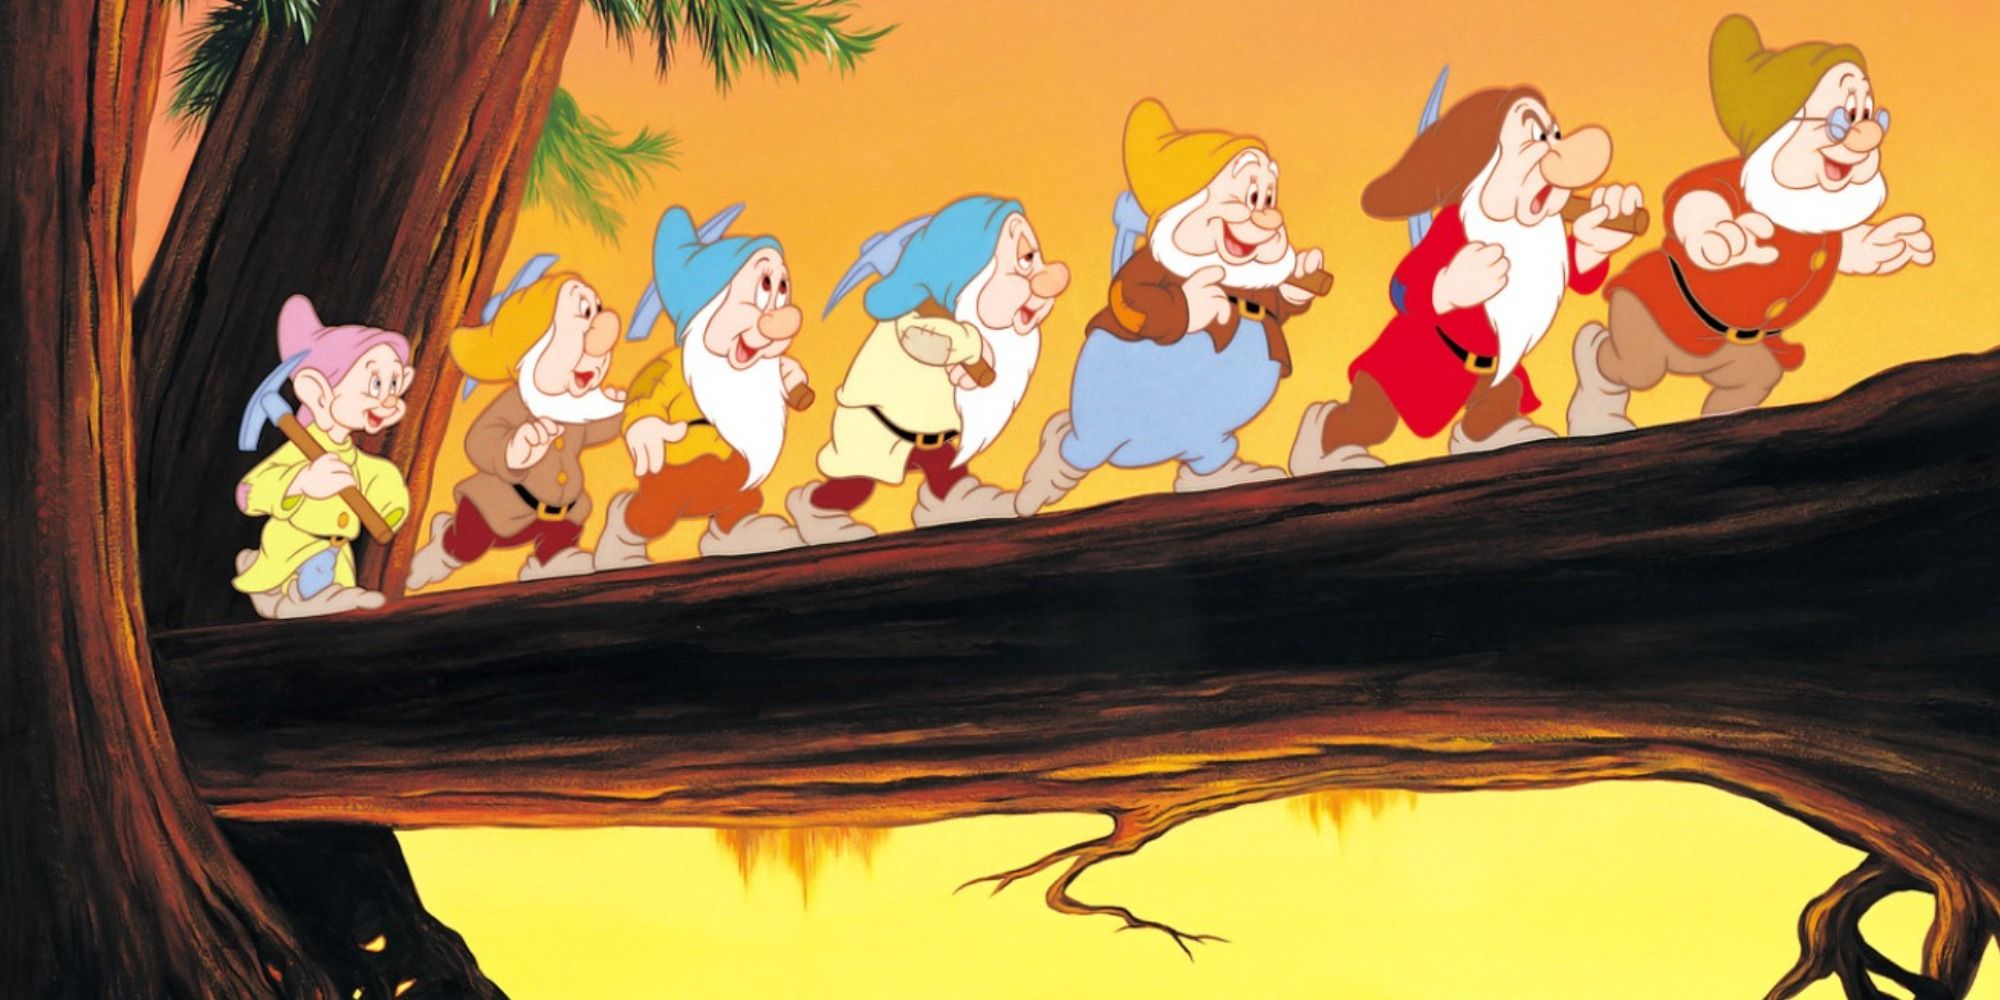 Disney: 19 Best Quotes From Snow White